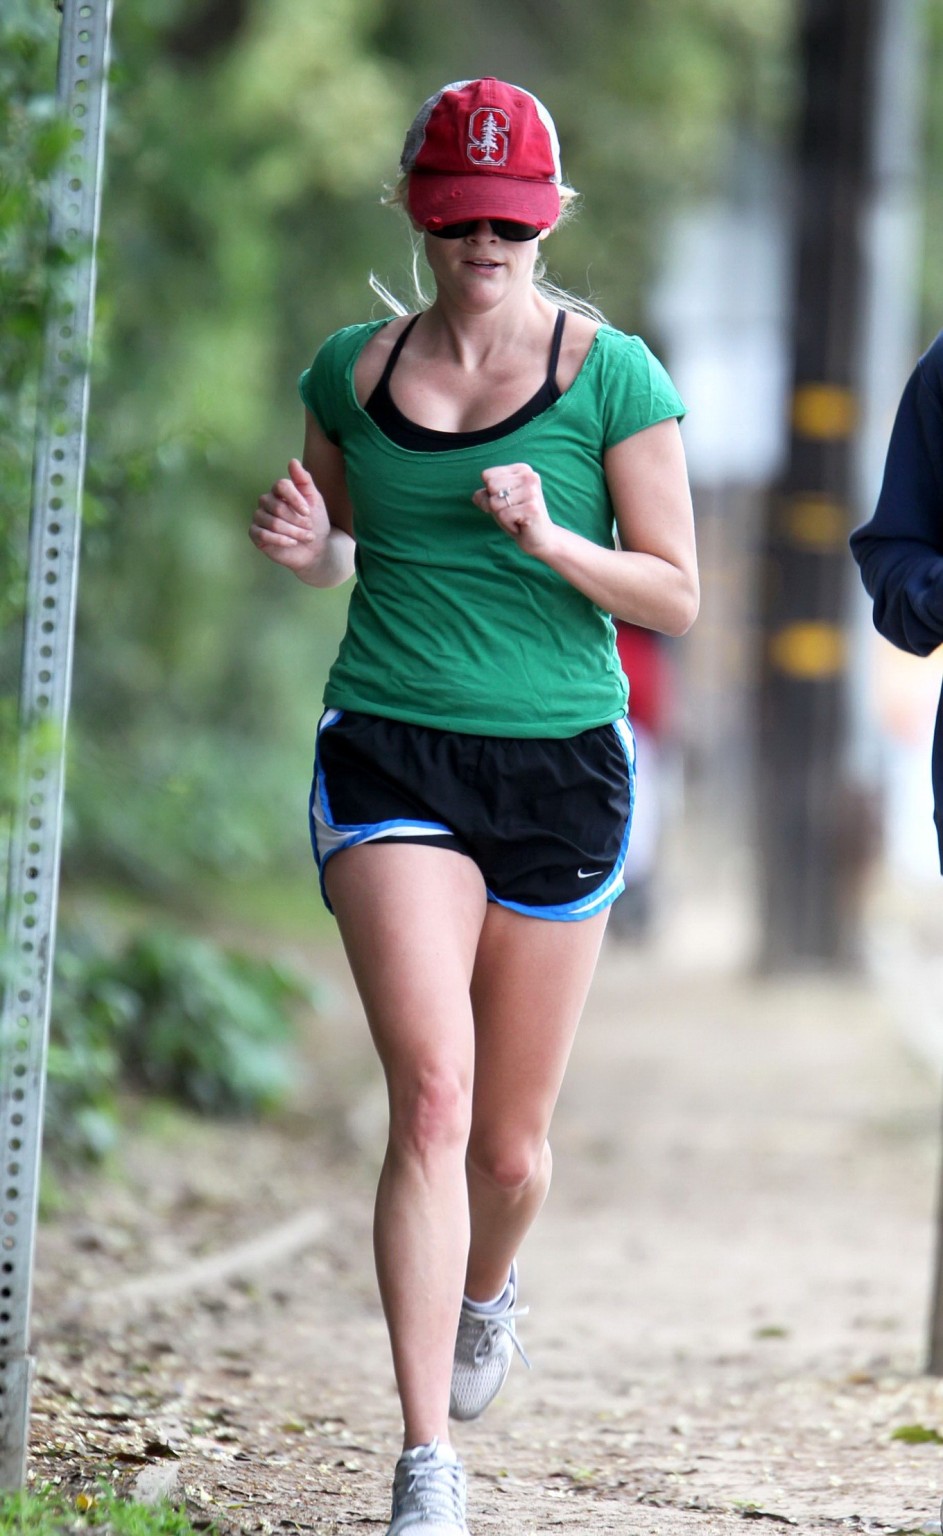 Reese Witherspoon langbeinig in Shorts beim Joggen in Brentwood
 #75312845